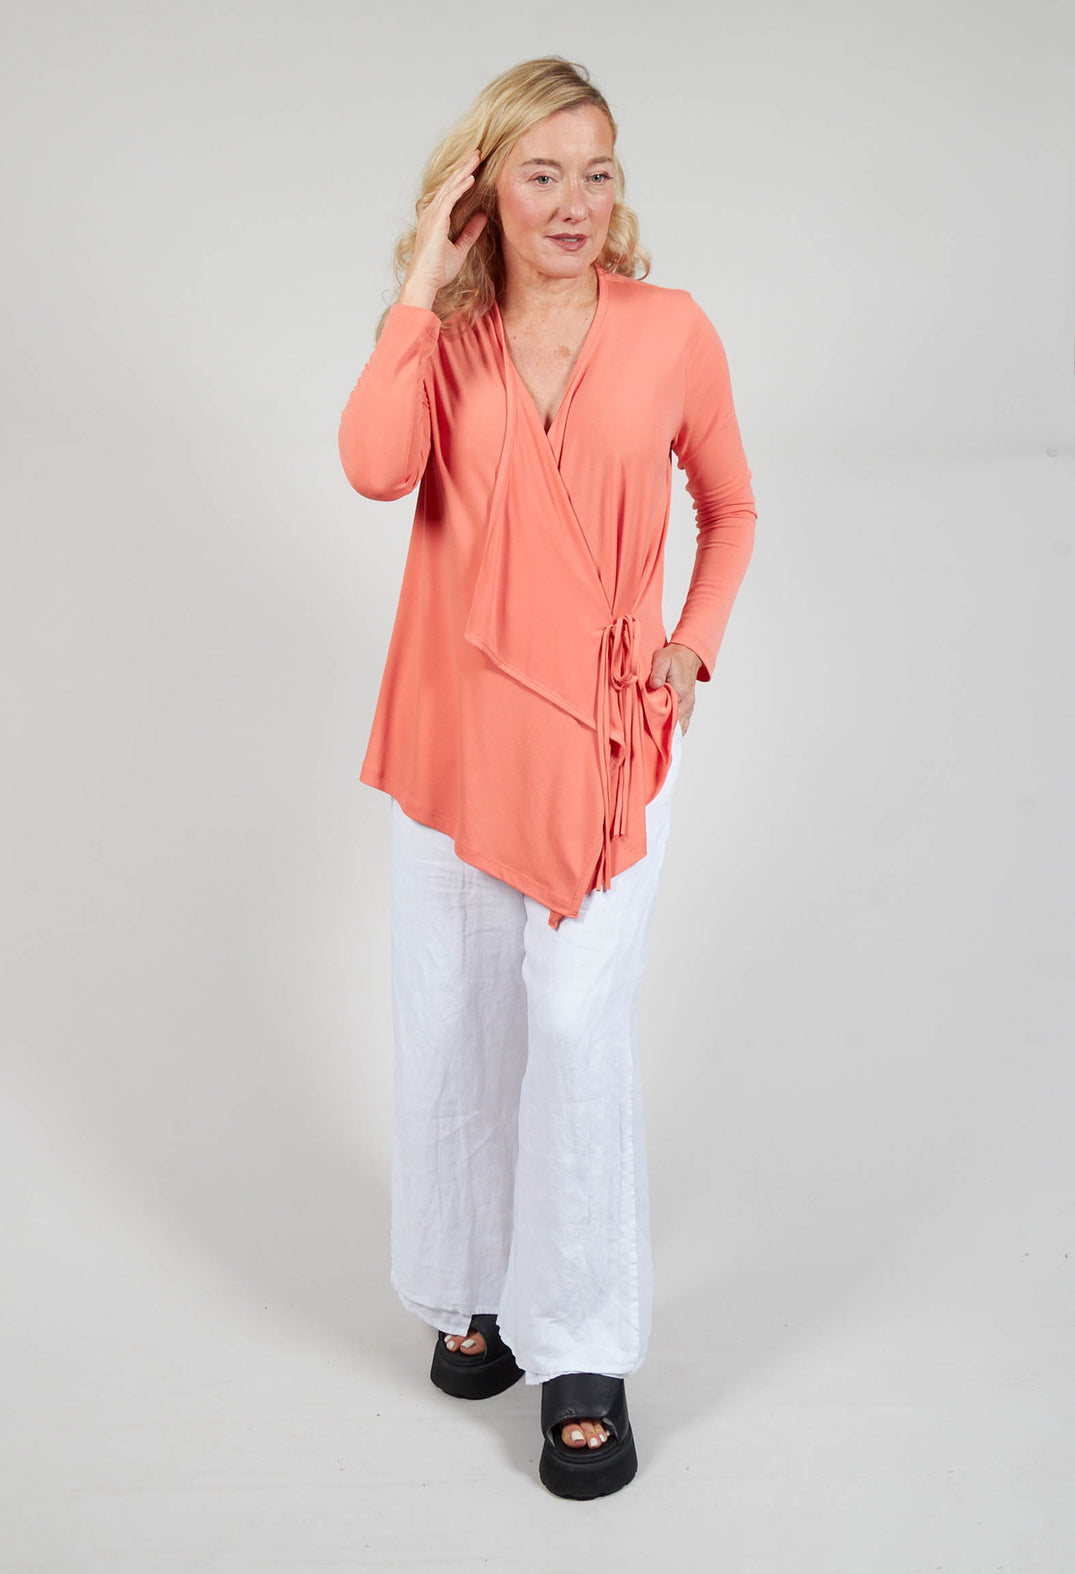 Draped Tie Jacket in Coral